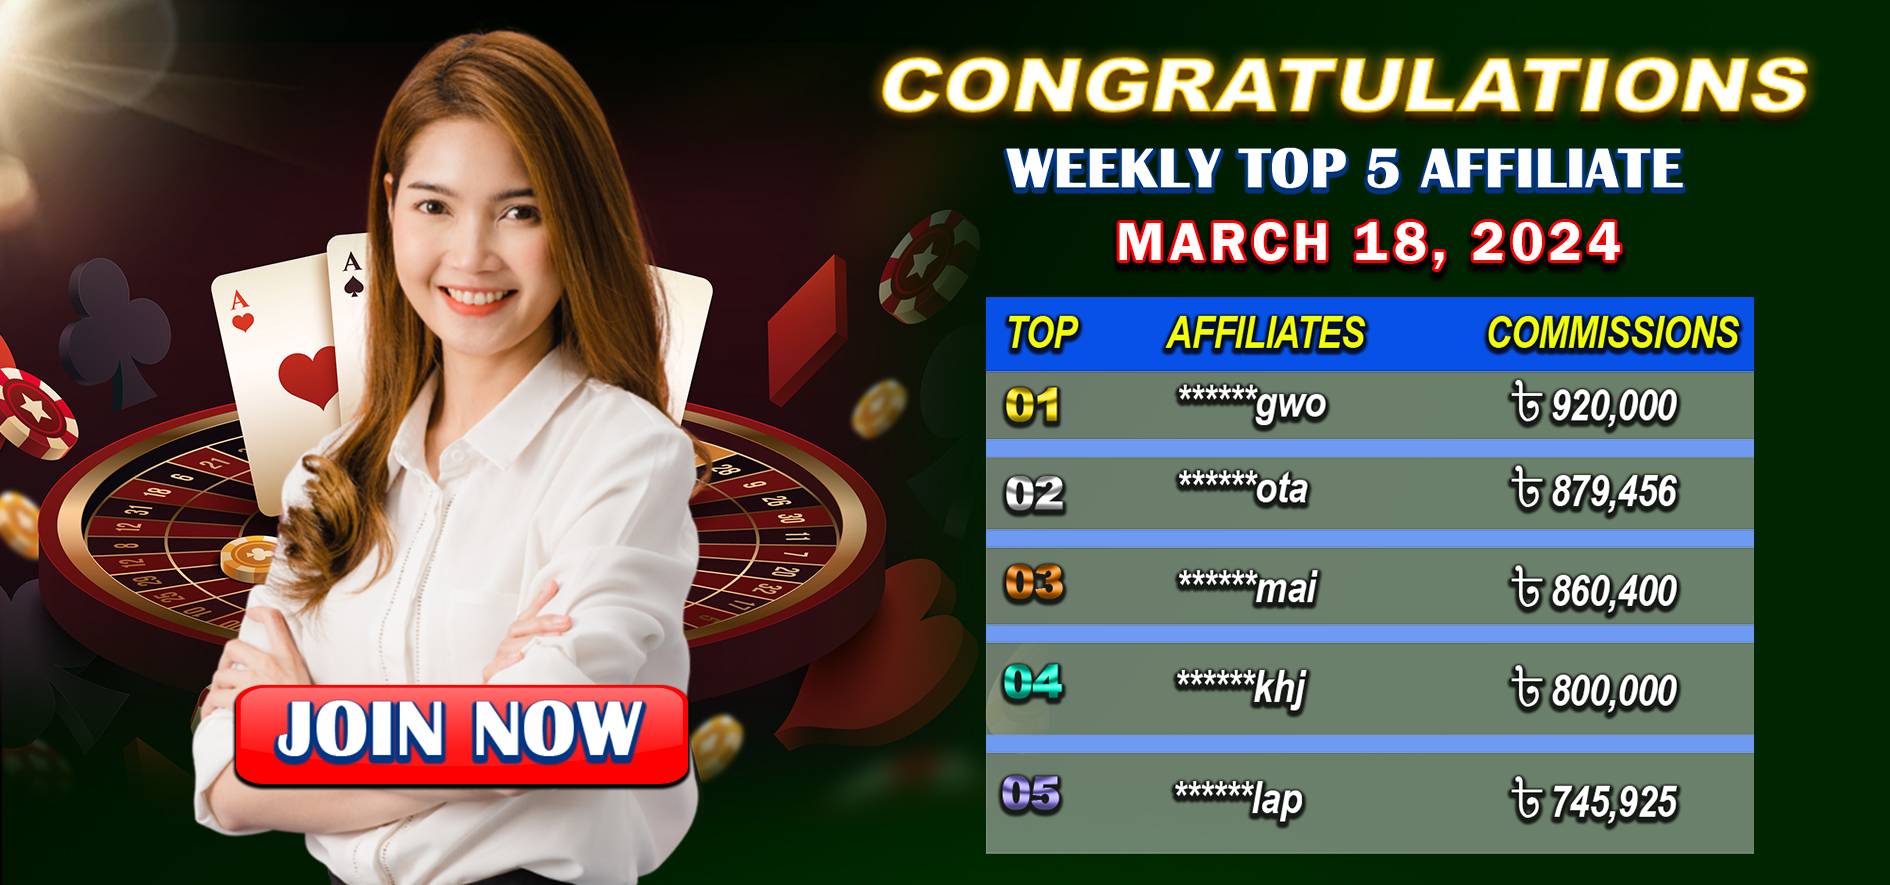 AFFILIATE weekly top 5 bjaff top banner MARCH 18 2024 BD